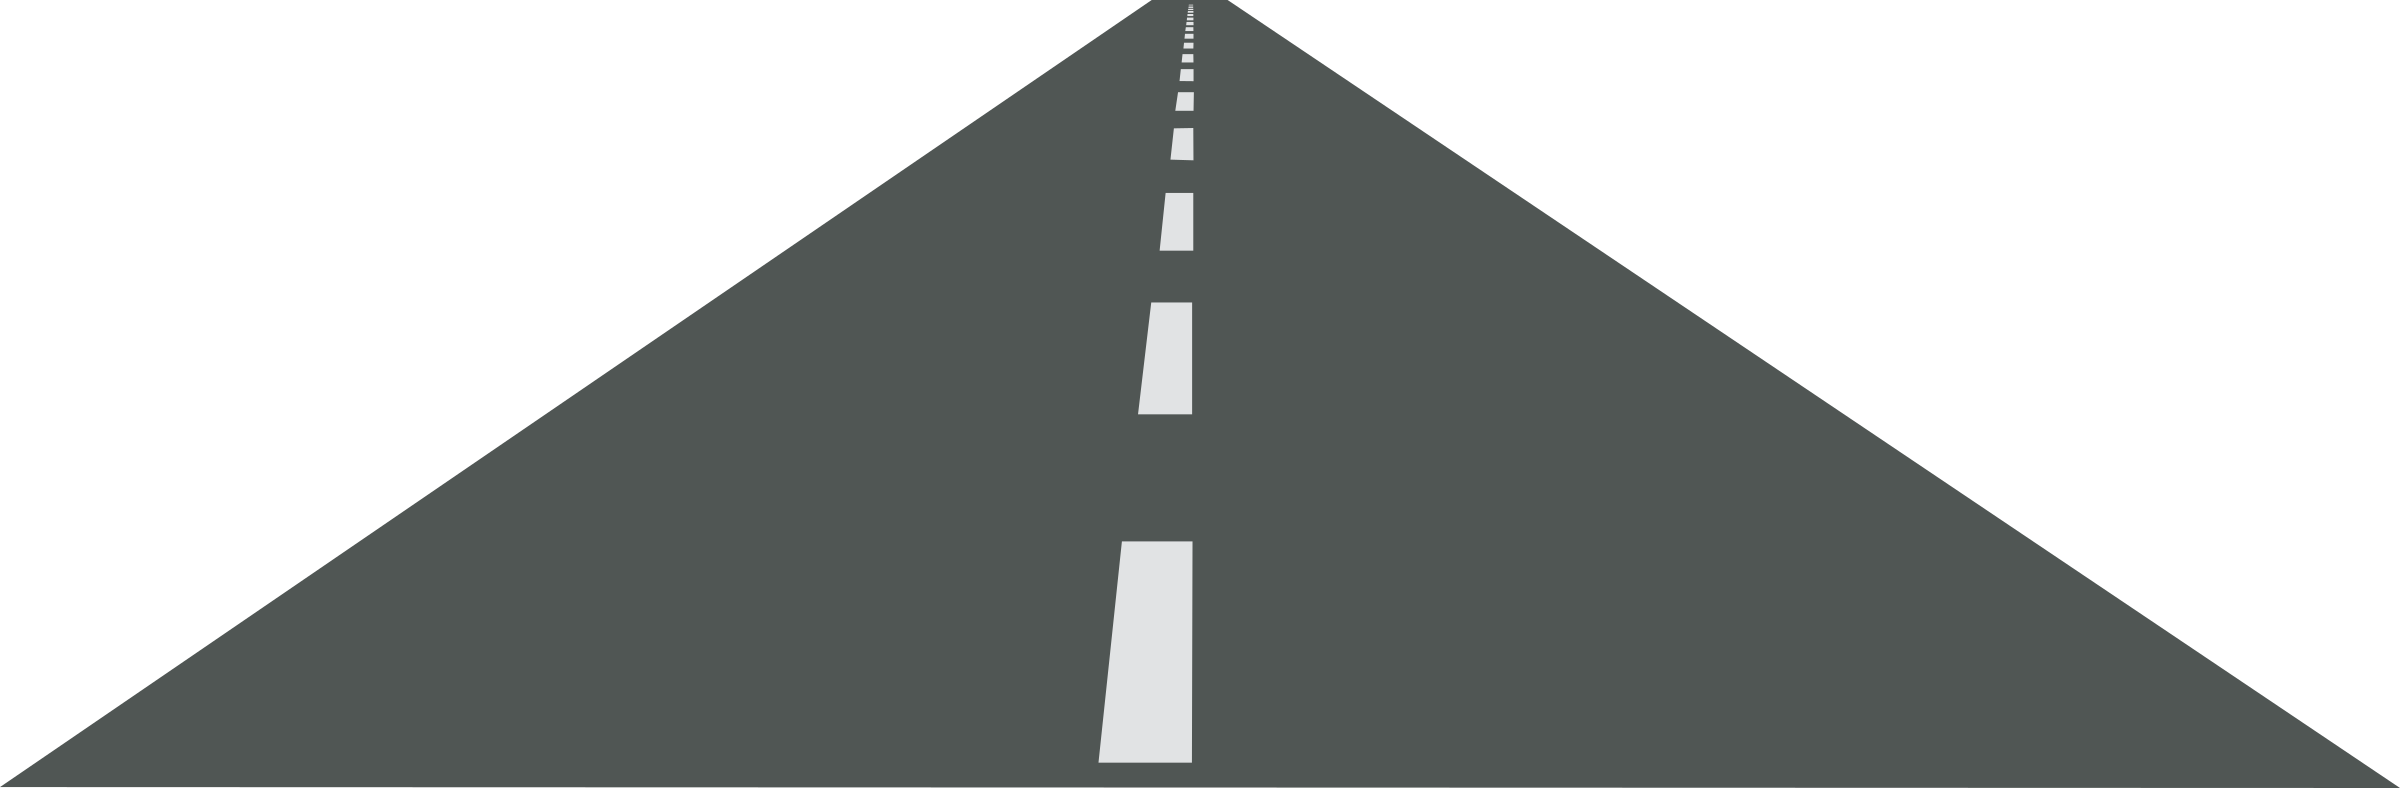 Download PNG image - Road PNG Photos 